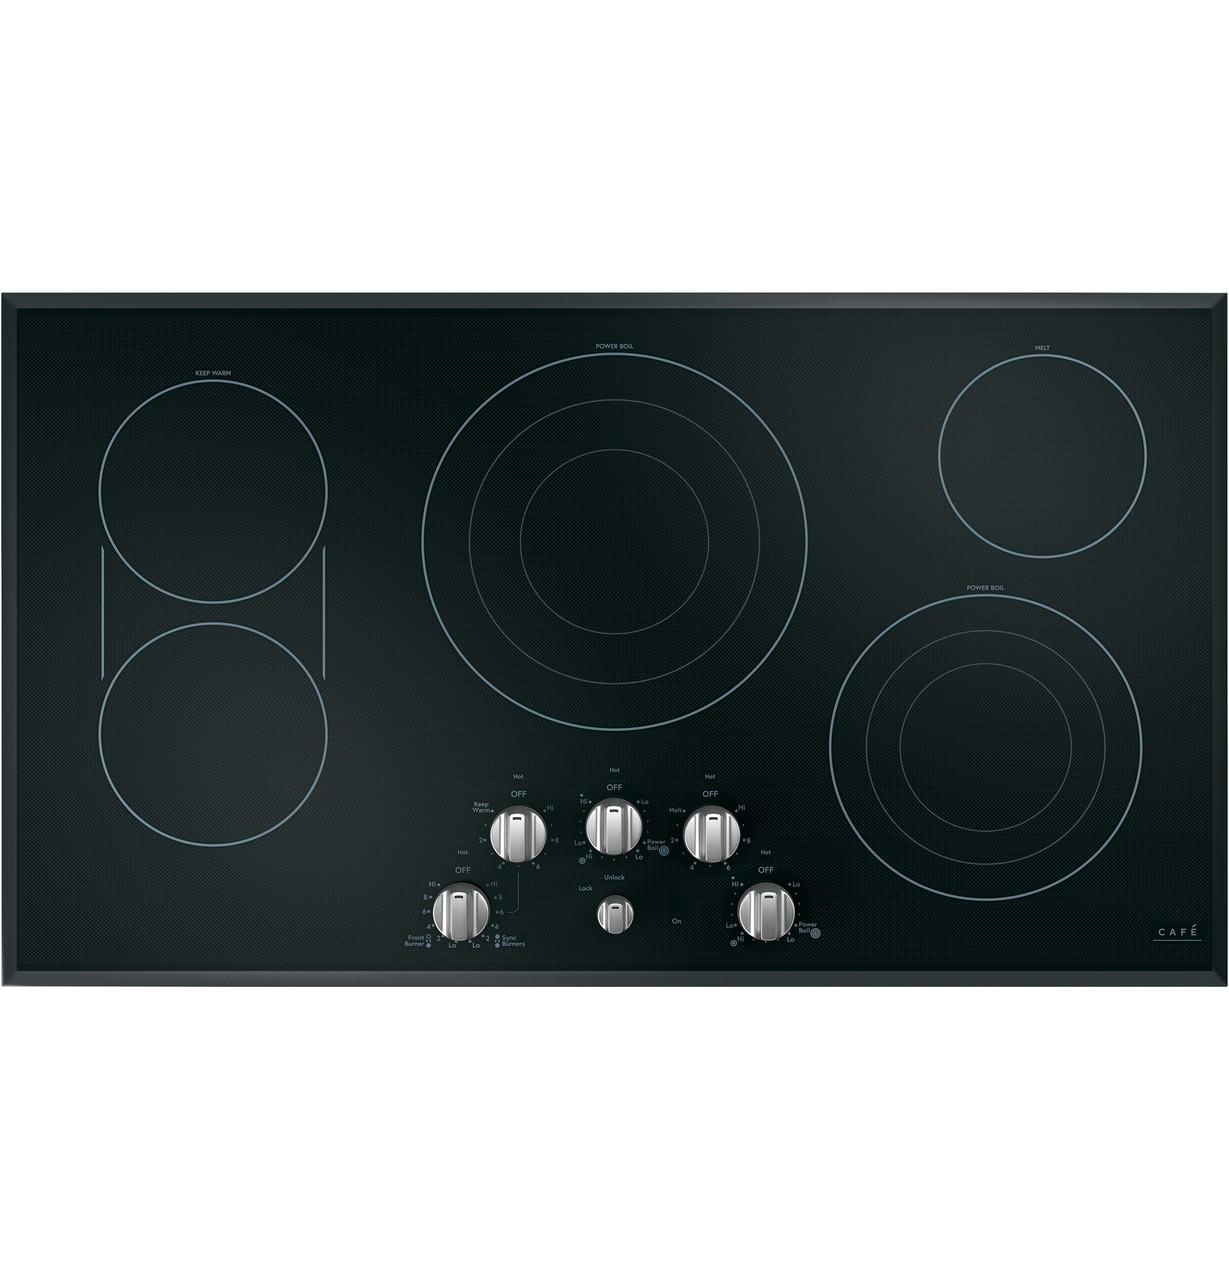 Cafe Caf(eback)™ 5 Electric Cooktop Knobs - Brushed Stainless